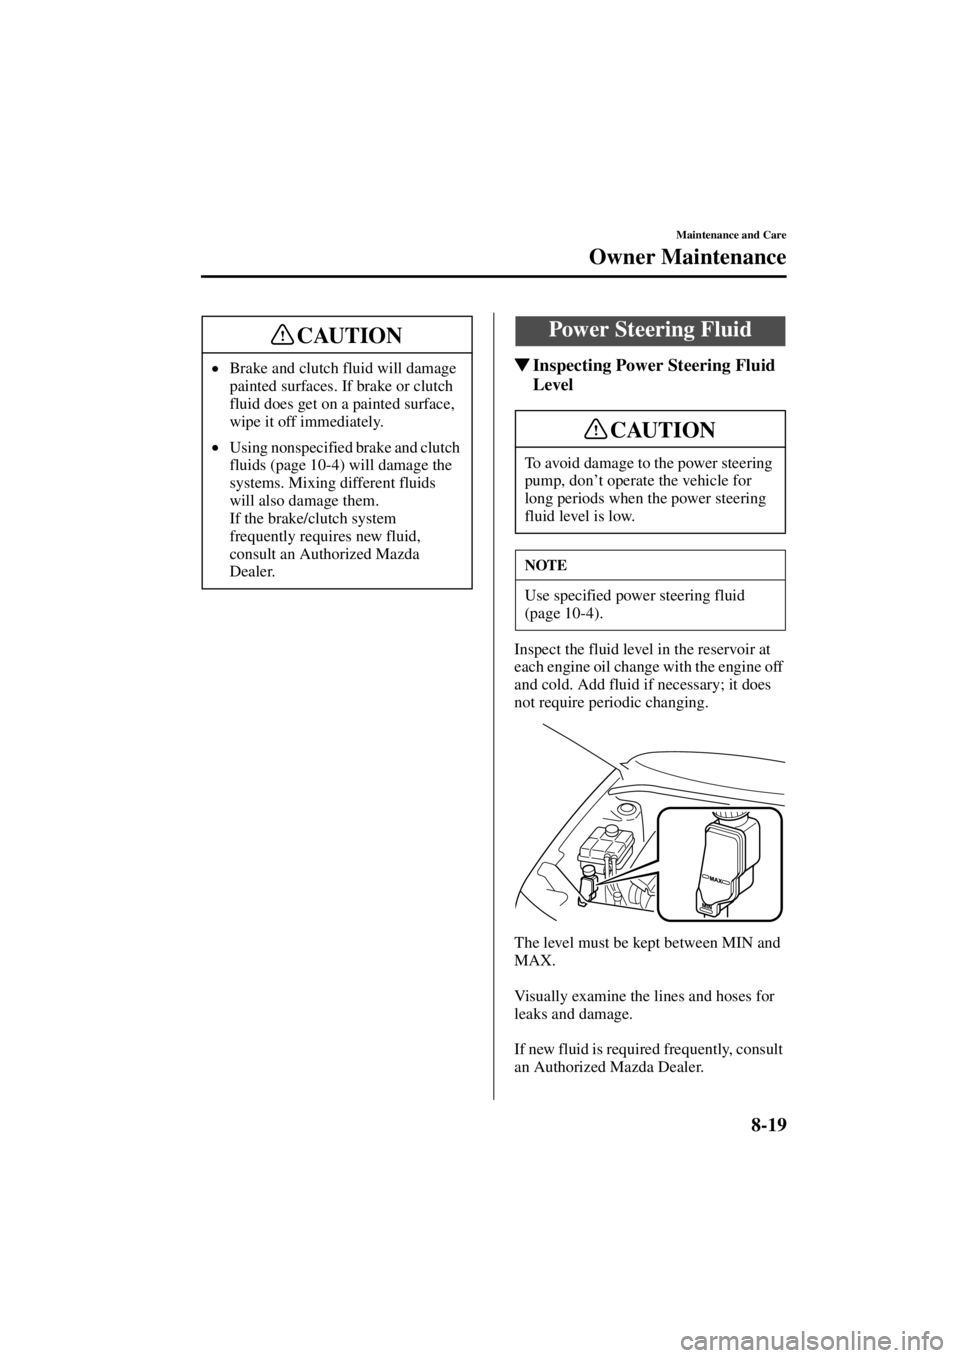 MAZDA MODEL 3 5-DOOR 2004  Owners Manual 8-19
Maintenance and Care
Owner Maintenance
Form No. 8S18-EA-03I
Inspecting Power Steering Fluid 
Level
Inspect the fluid level in the reservoir at 
each engine oil change with the engine off 
and co